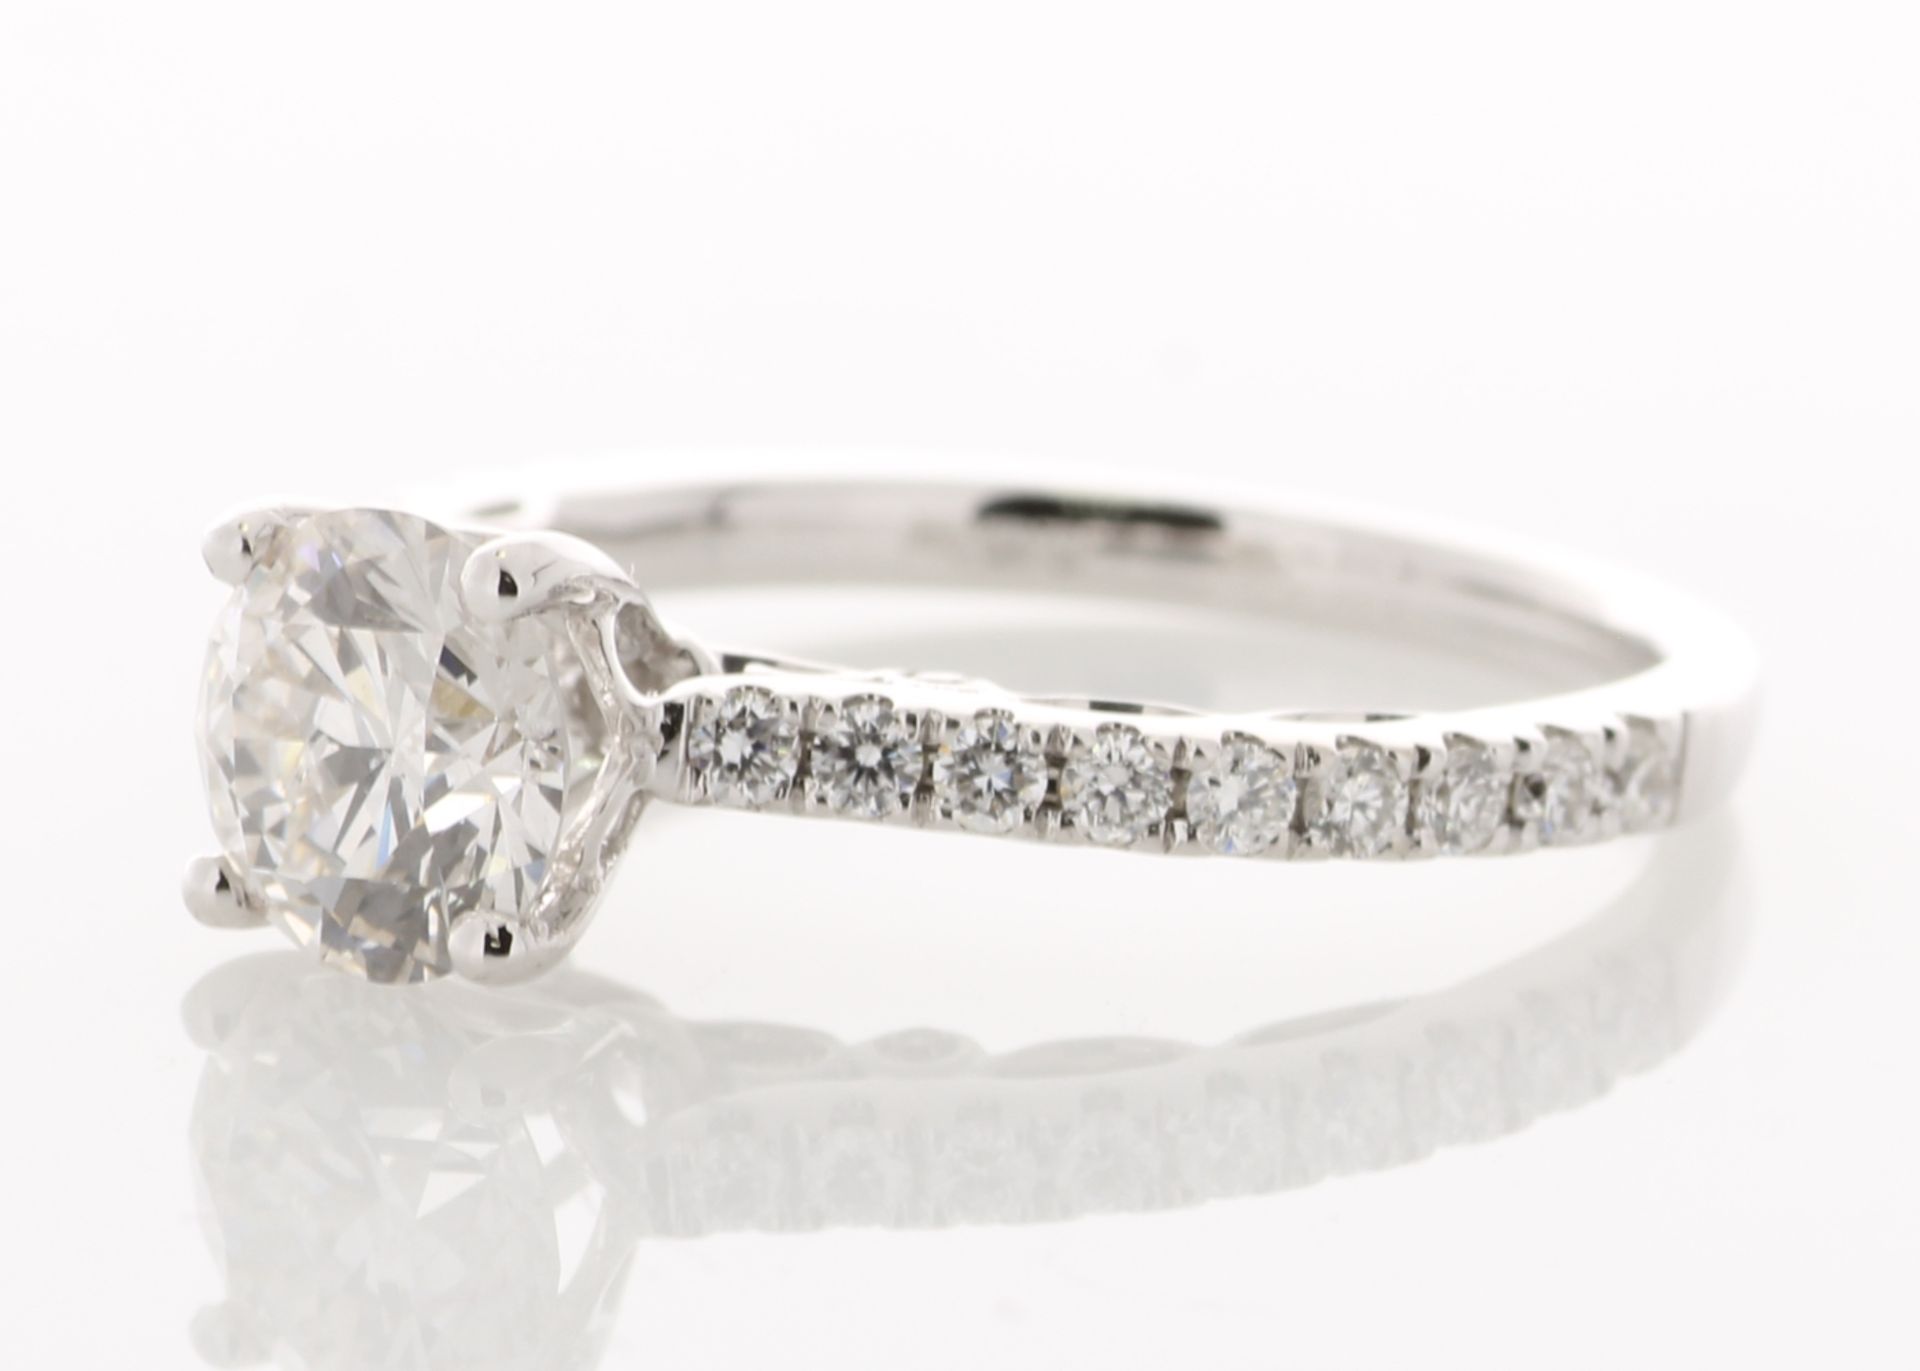 18ct White Gold Diamond Ring With Stone Set Shoulders 1.46 Carats - Valued By IDI £24,950.00 - A - Image 2 of 6